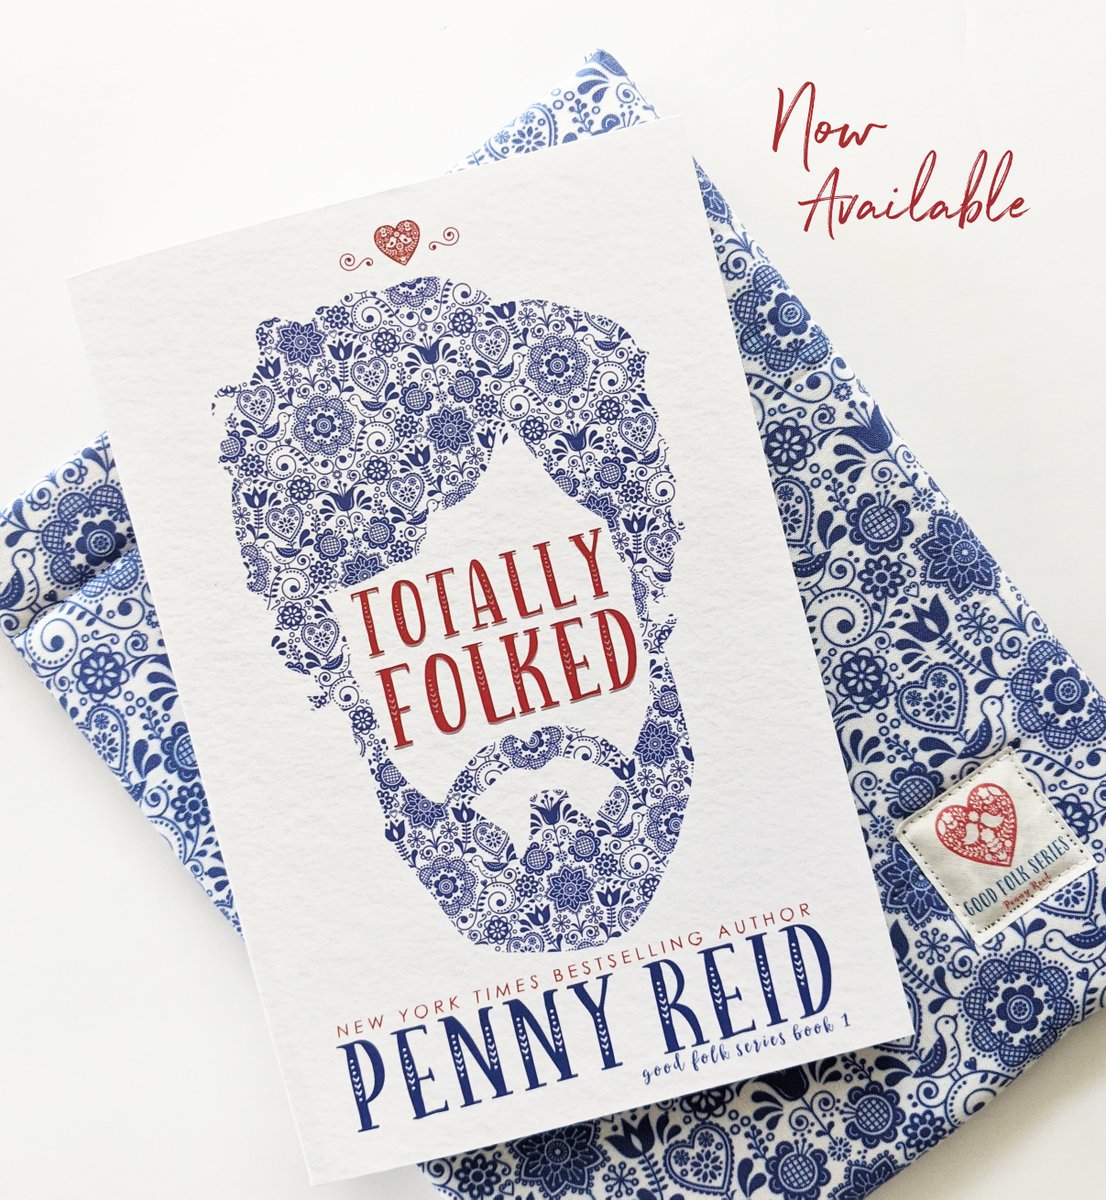 💚Totally Folked an all-new small town romantic comedy filled with humor and heart from New York Times bestselling author @reidromance is available now!

Fall in love today→ bit.ly/3wobVfq

#totallyfolked #availablenow #booknerd #romanceaddicts  @socialbutterfly_pr